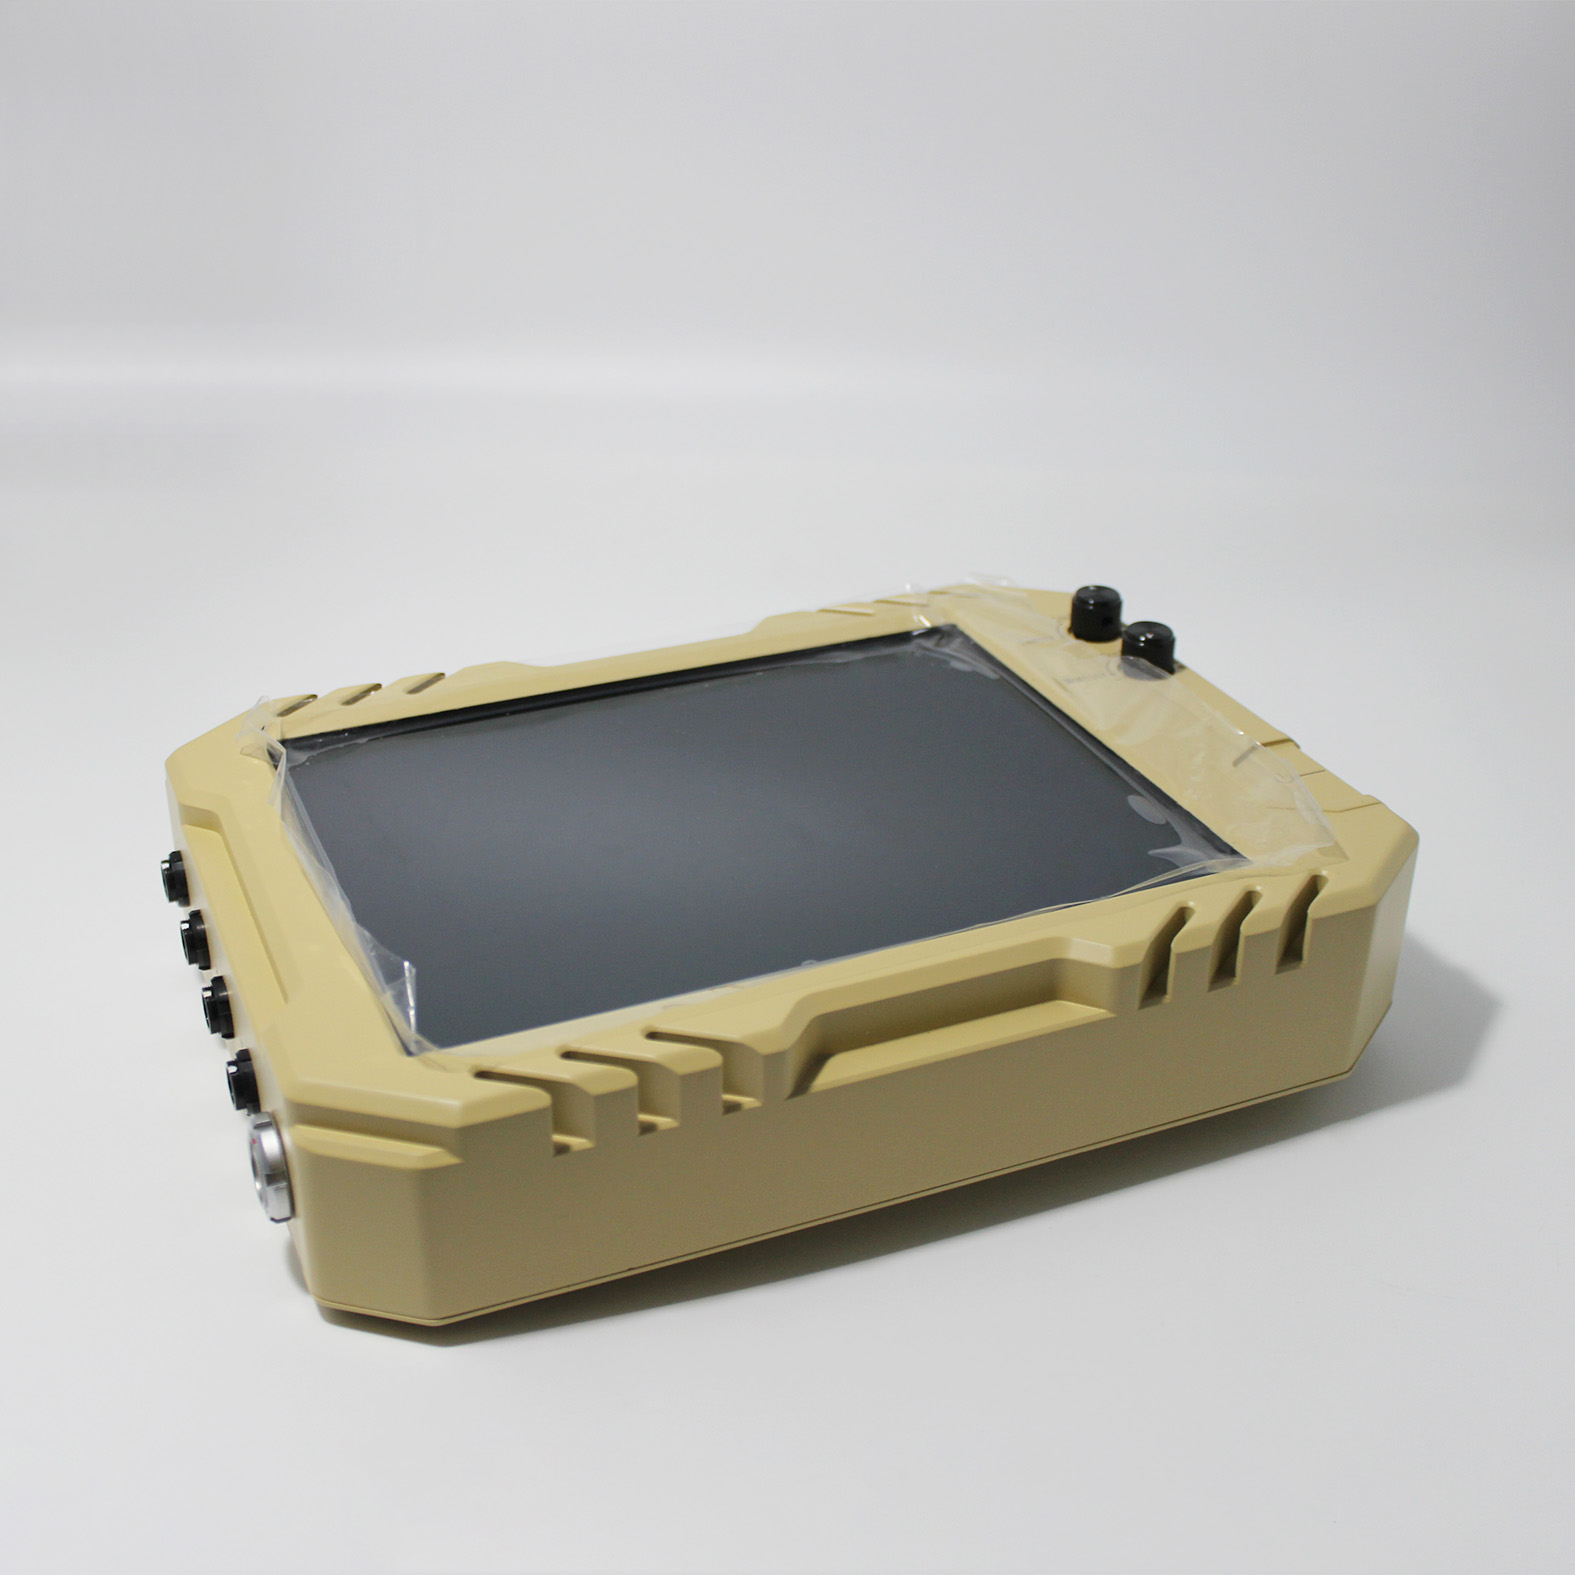 China Supplier OEM ODM Spike-BF Automobile Thermal Imager Display